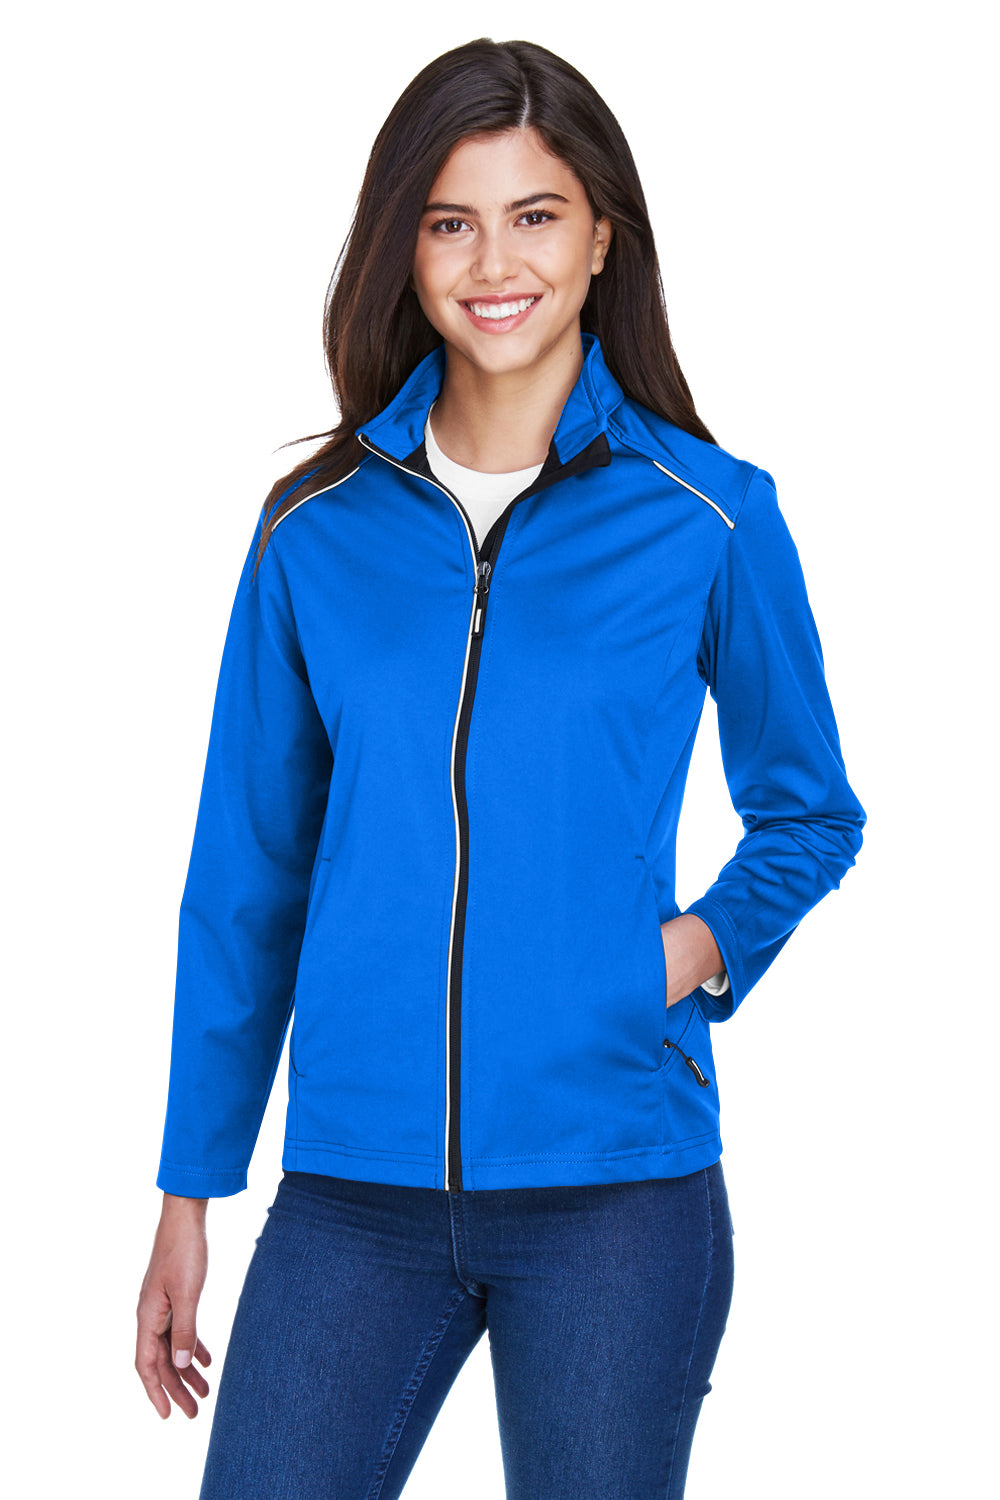 Core 365 CE708W Womens Techno Lite Water Resistant Full Zip Jacket Royal Blue Front